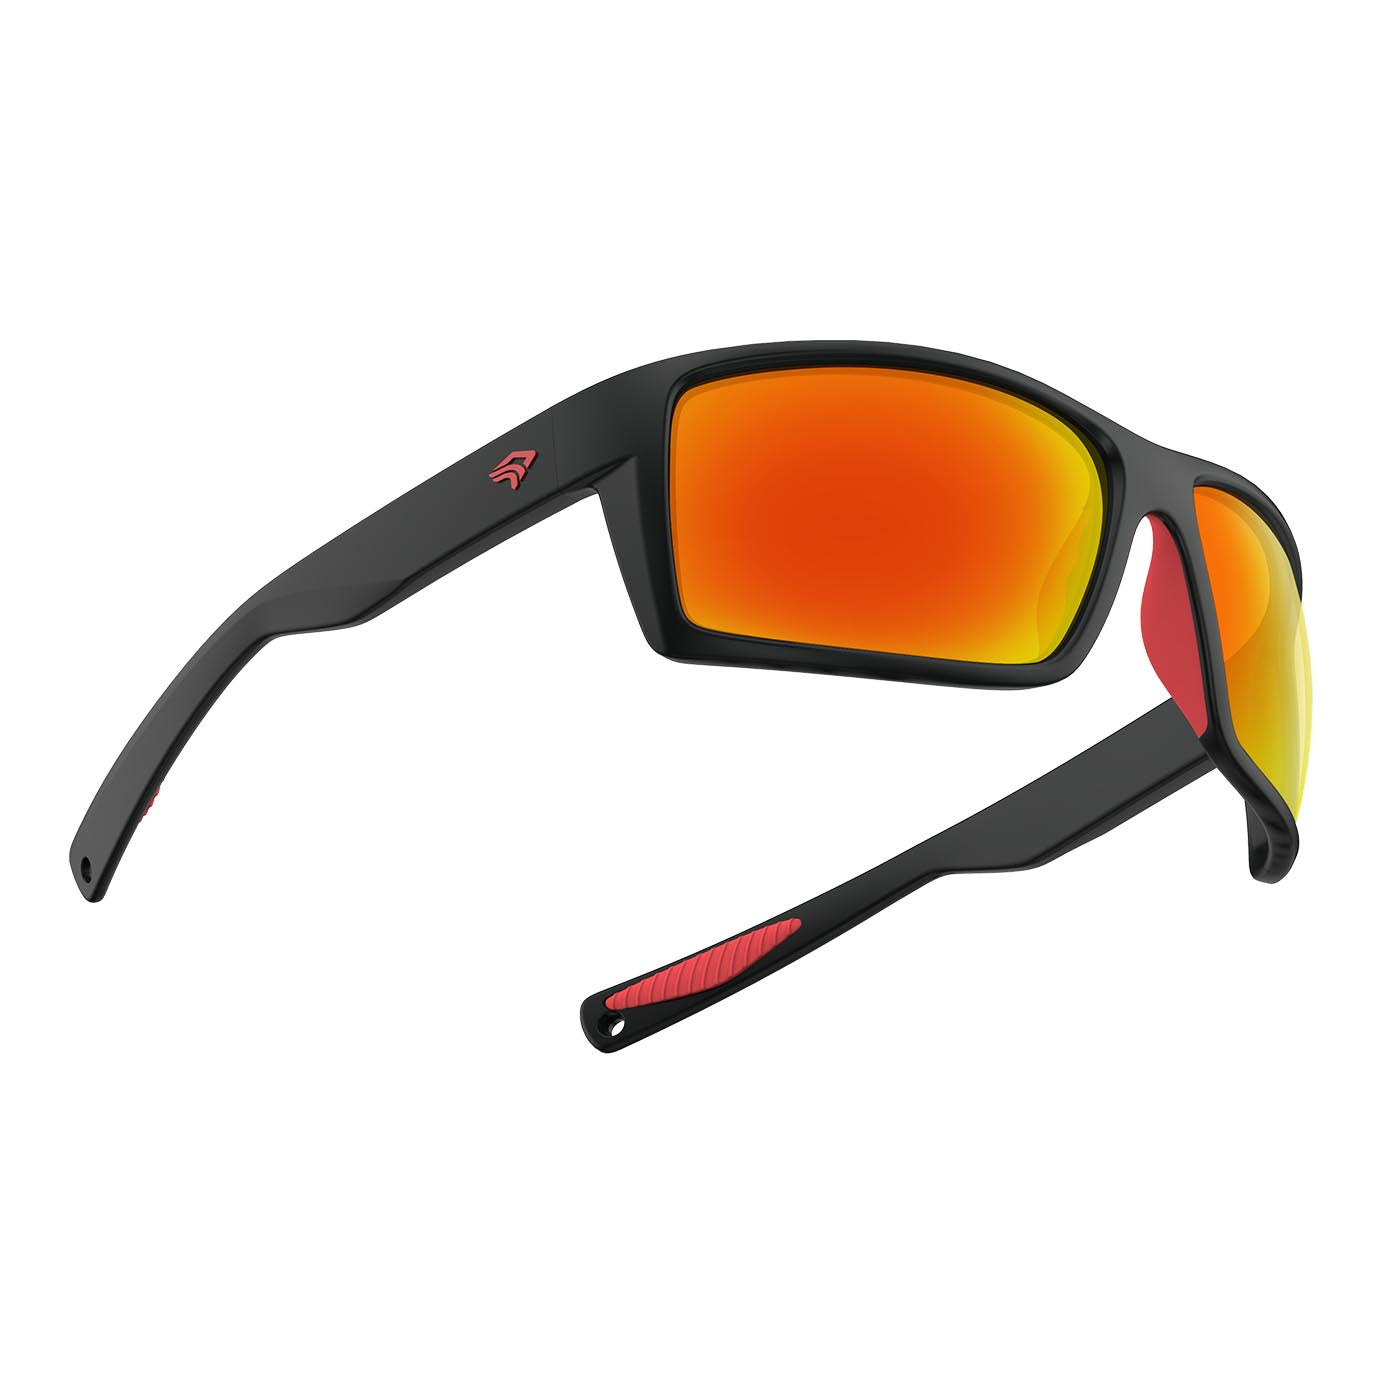 Torege 'Tension' Sports Polarized Sunglasses for Men and Women - Lifetime Warranty - Perfect for Fishing, Boating, Beach, Golf, Surf & Driving